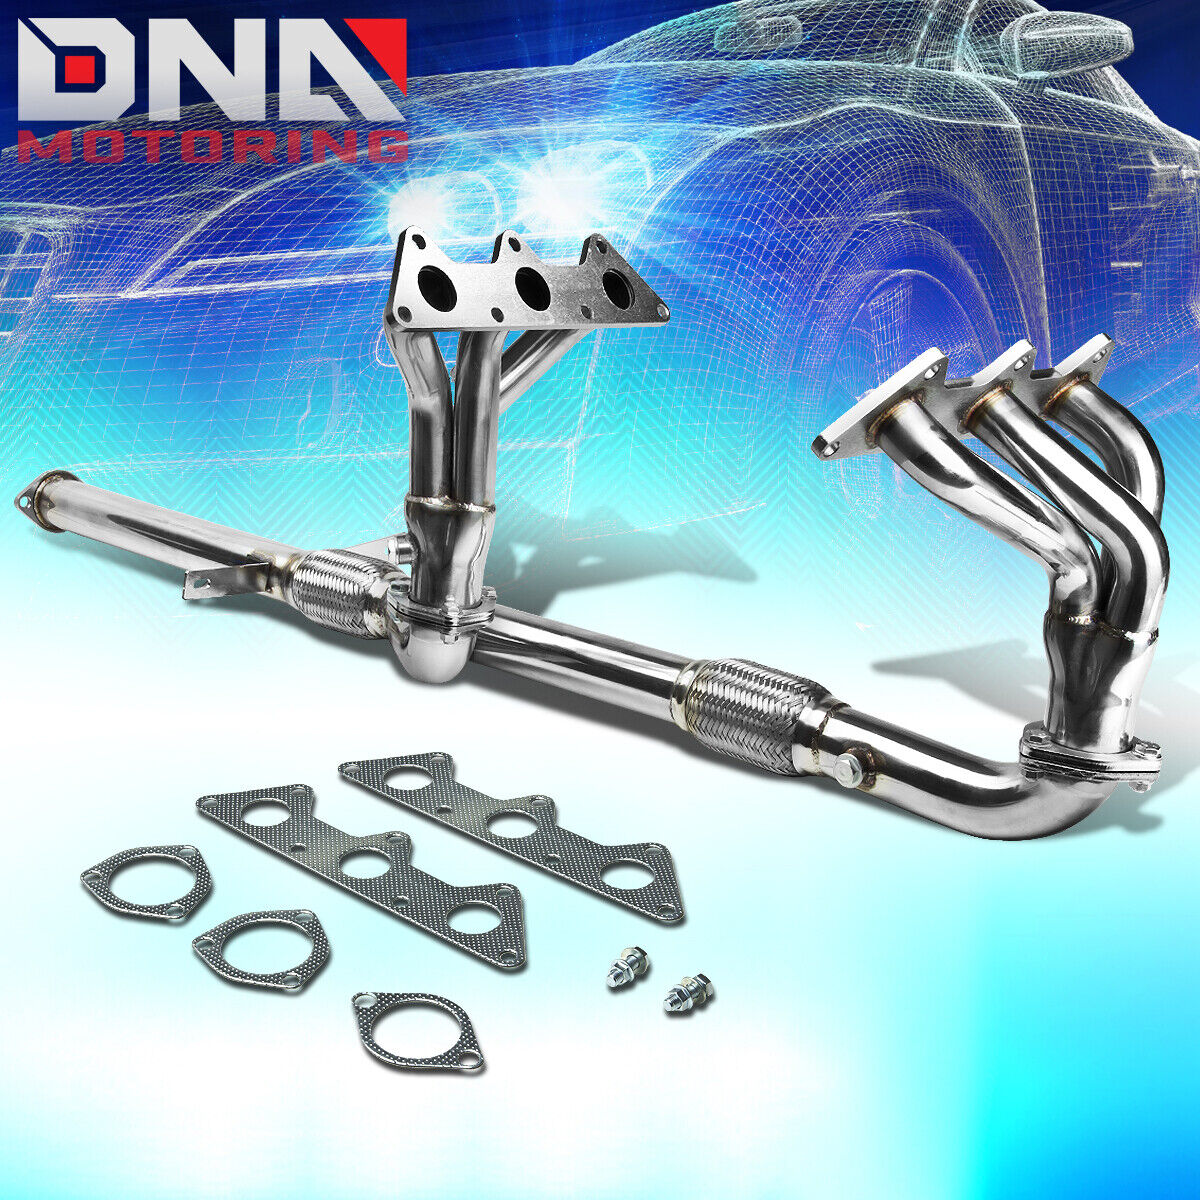 STAINLESS STEEL 6-2-1 HEADER FOR 00-05 MIT ECLIPSE GT 3.0L V6 EXHAUST/MANIFOLD